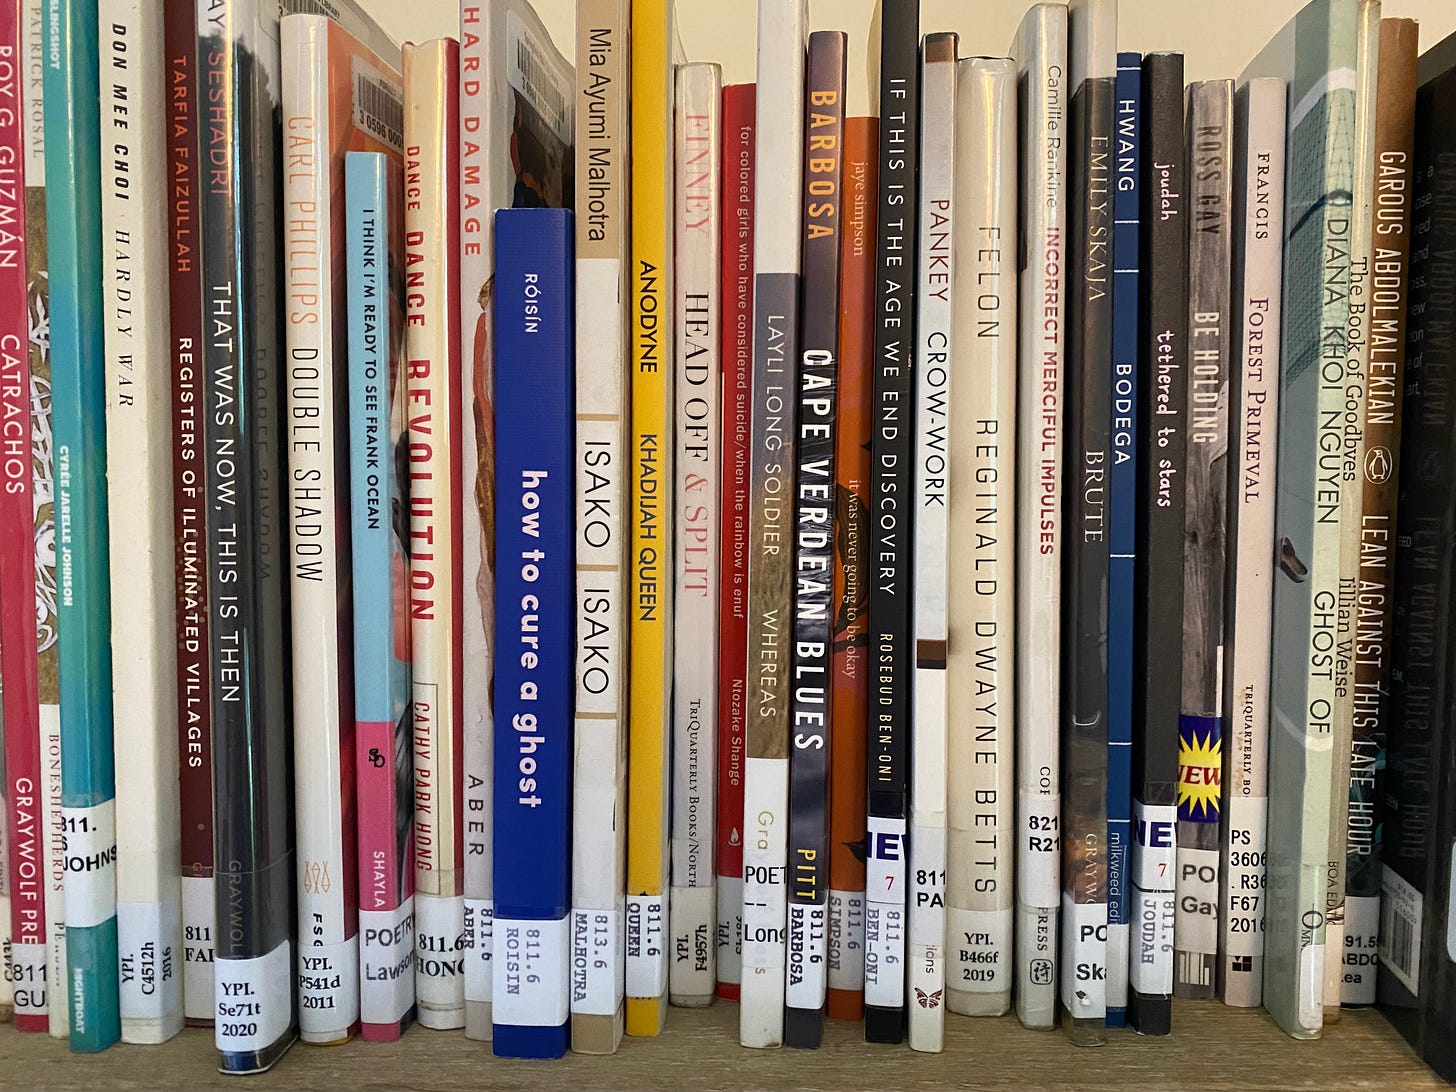 Closeup of a shelf full of thin poetry books with colorful spines.